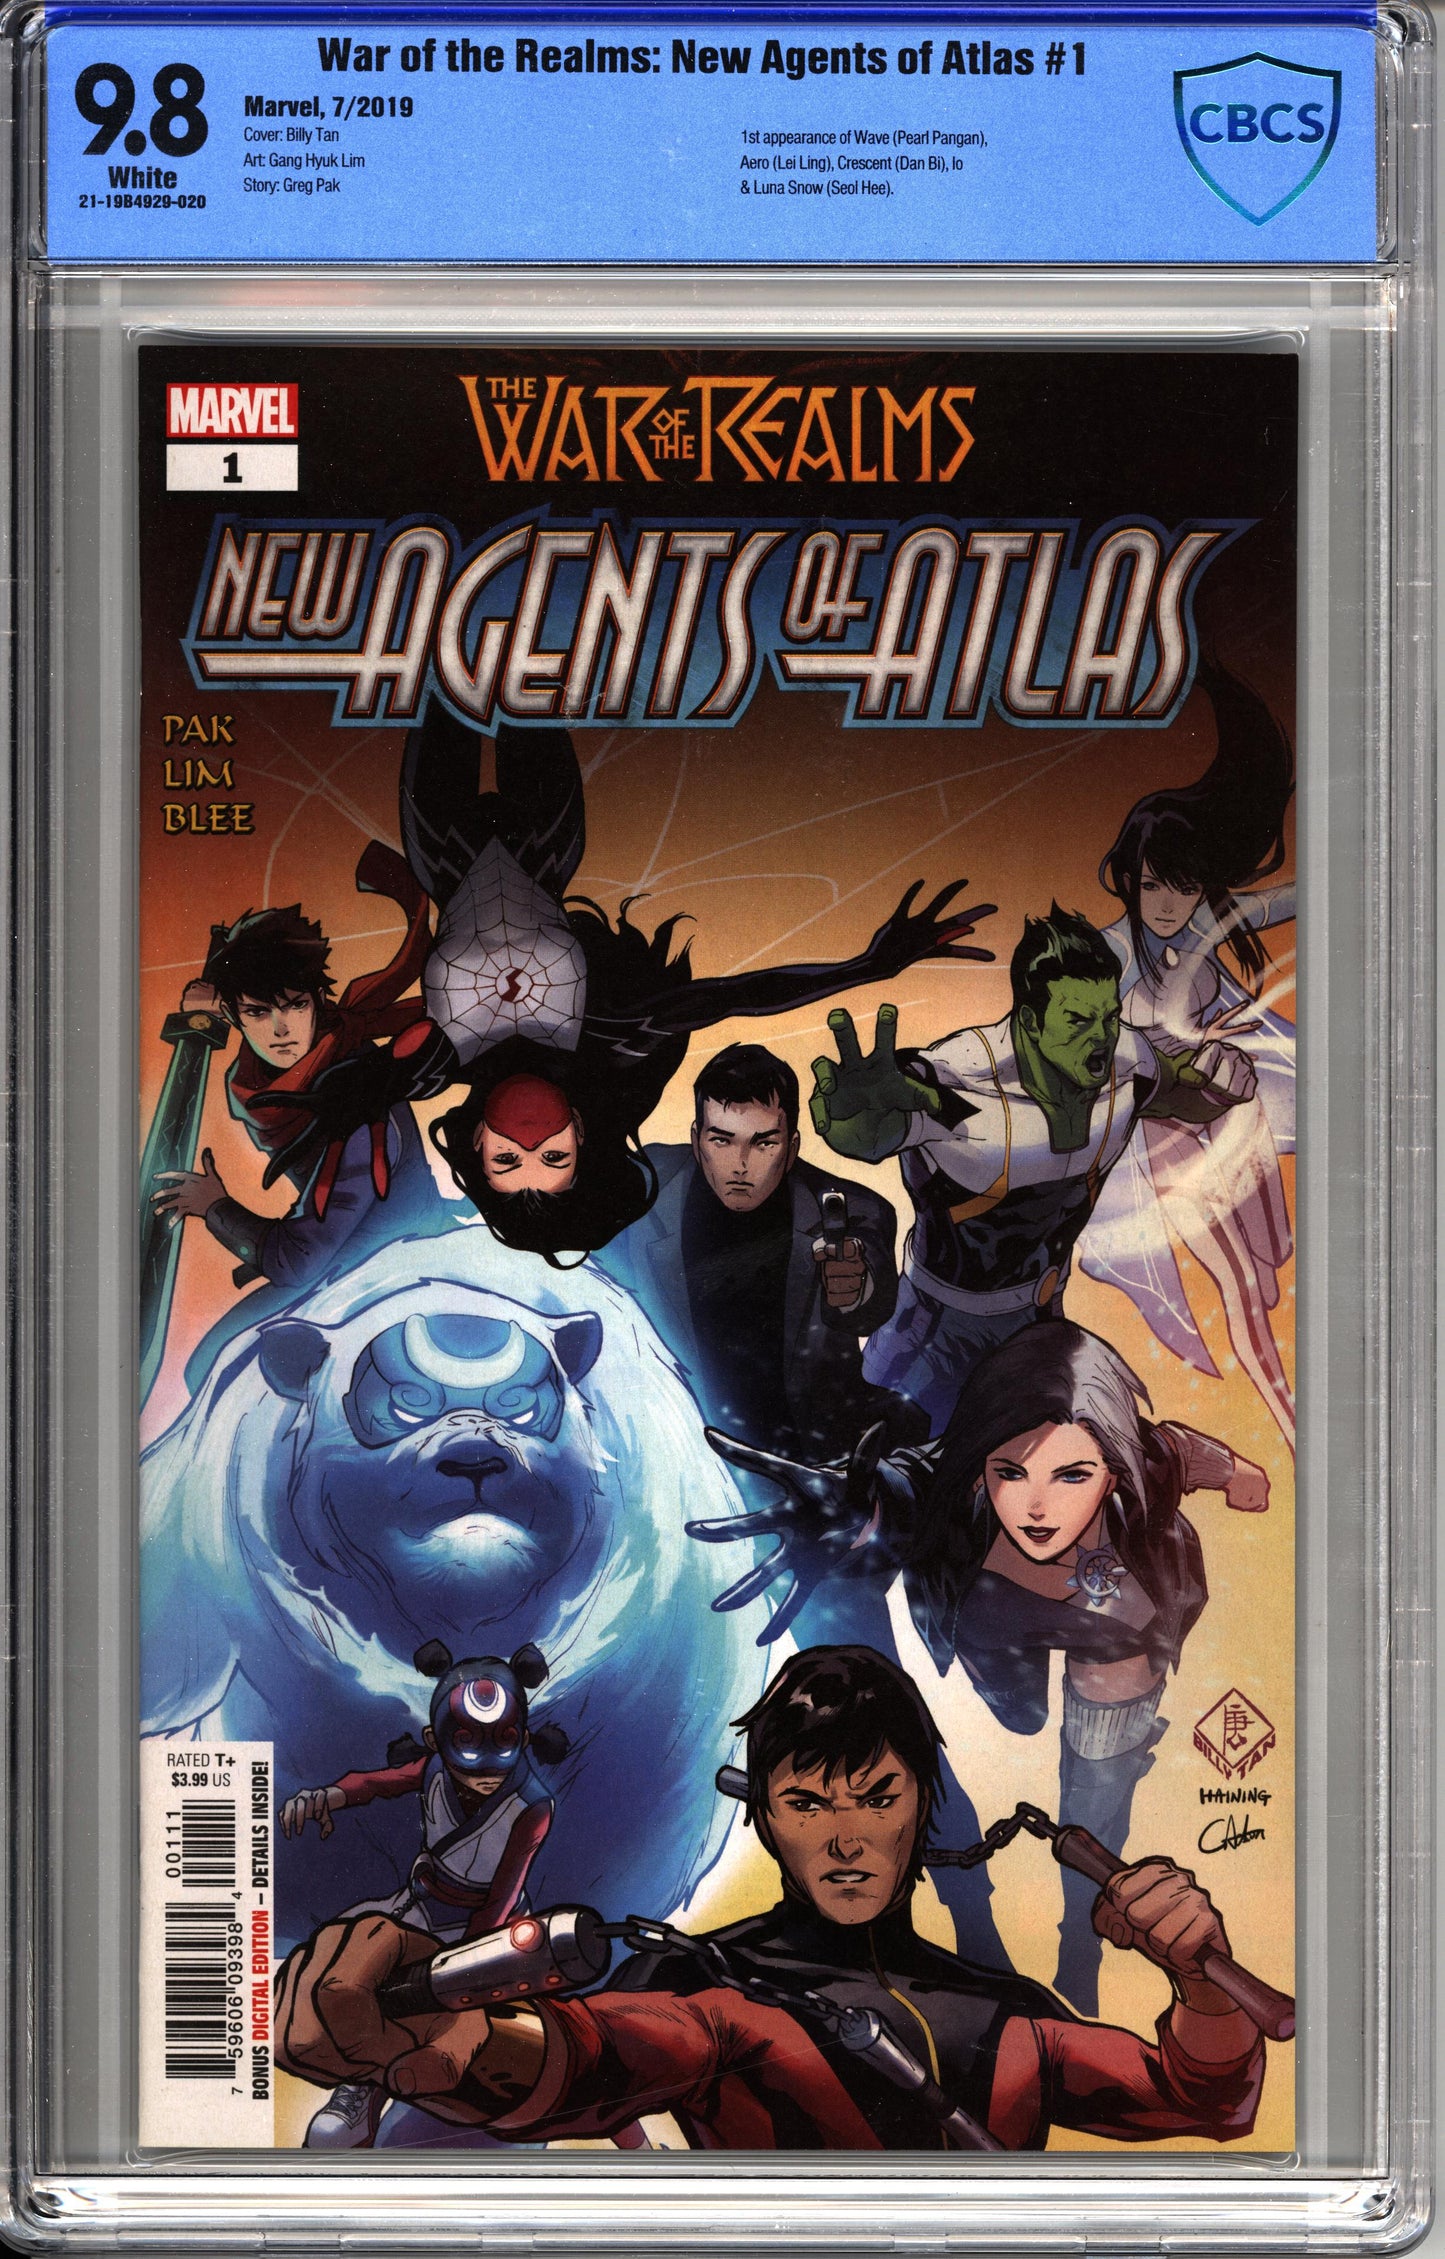 War of the Realms: New Agents of Atlas #1 (2019) CBCS 9.8 Grade